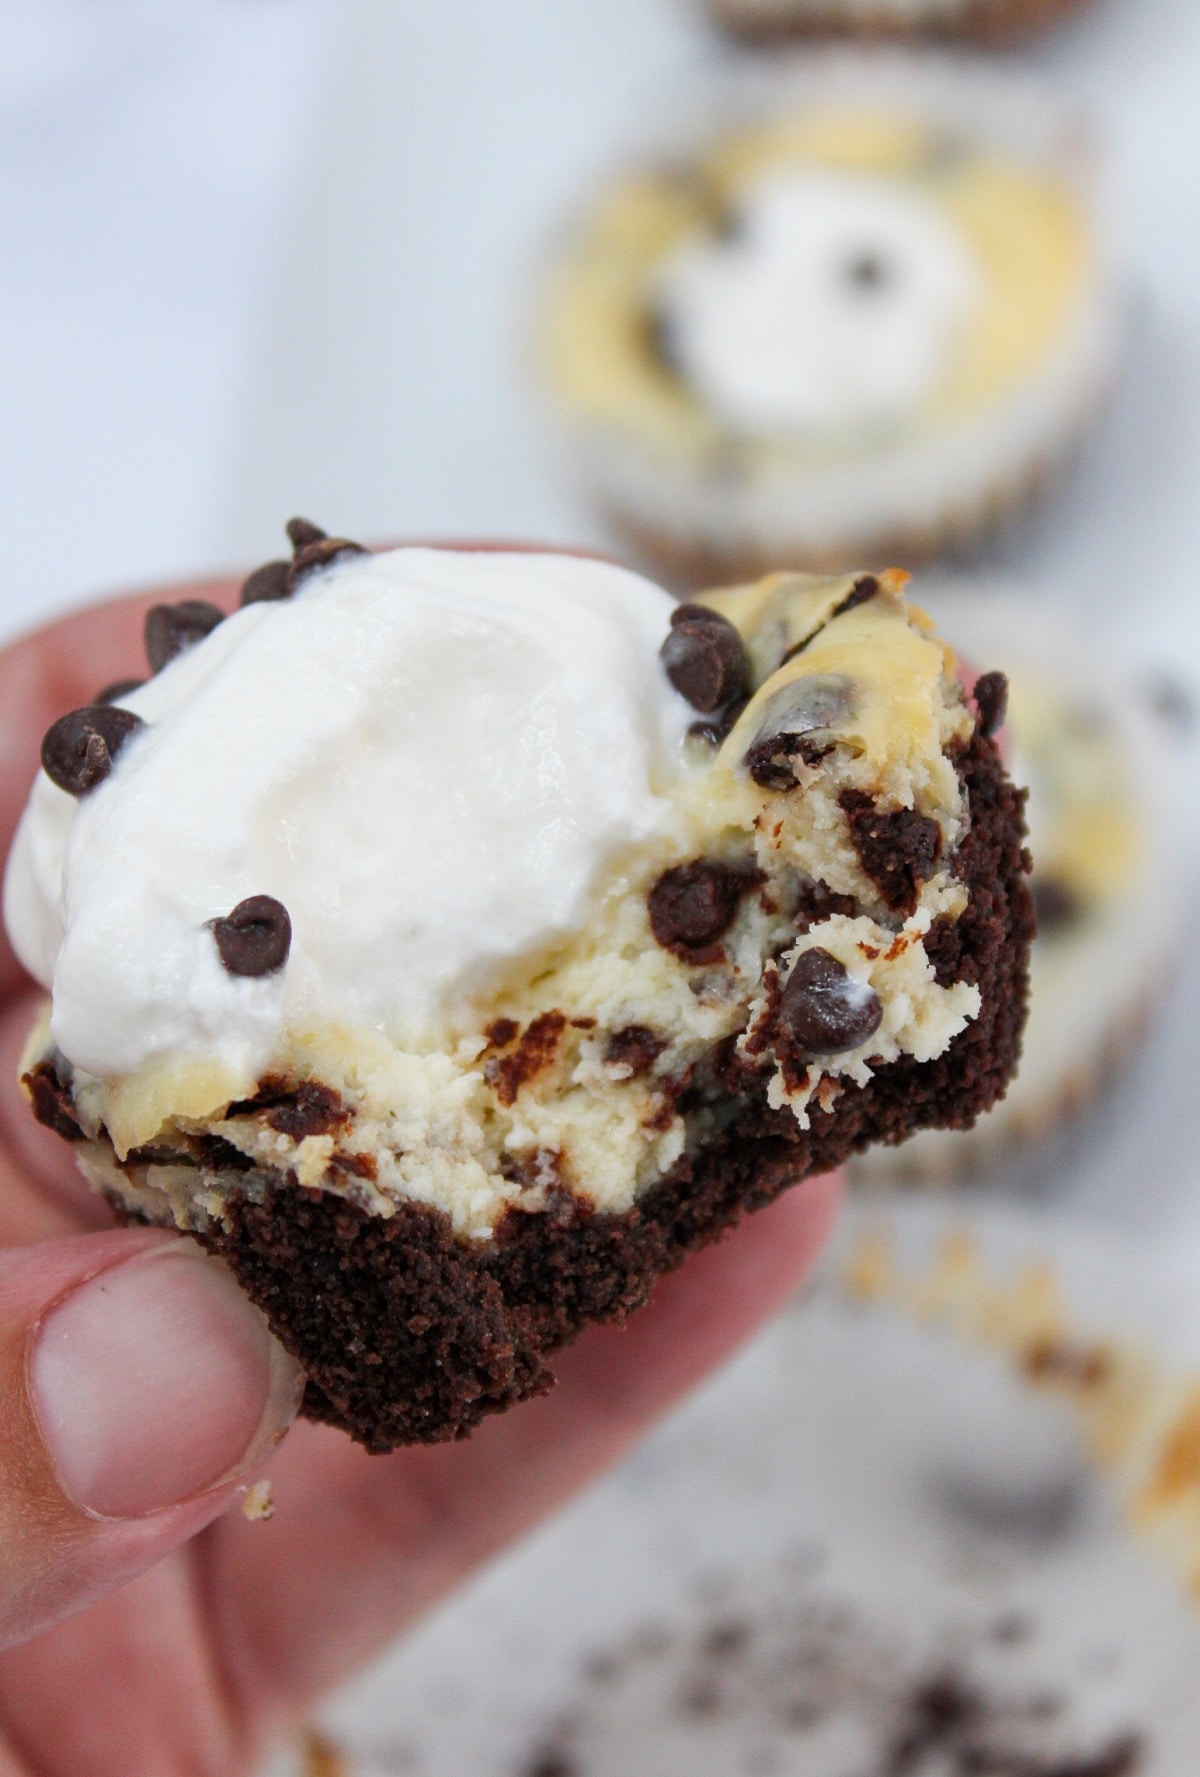 mini chocolate chip cheesecake held in hand with a bite taken